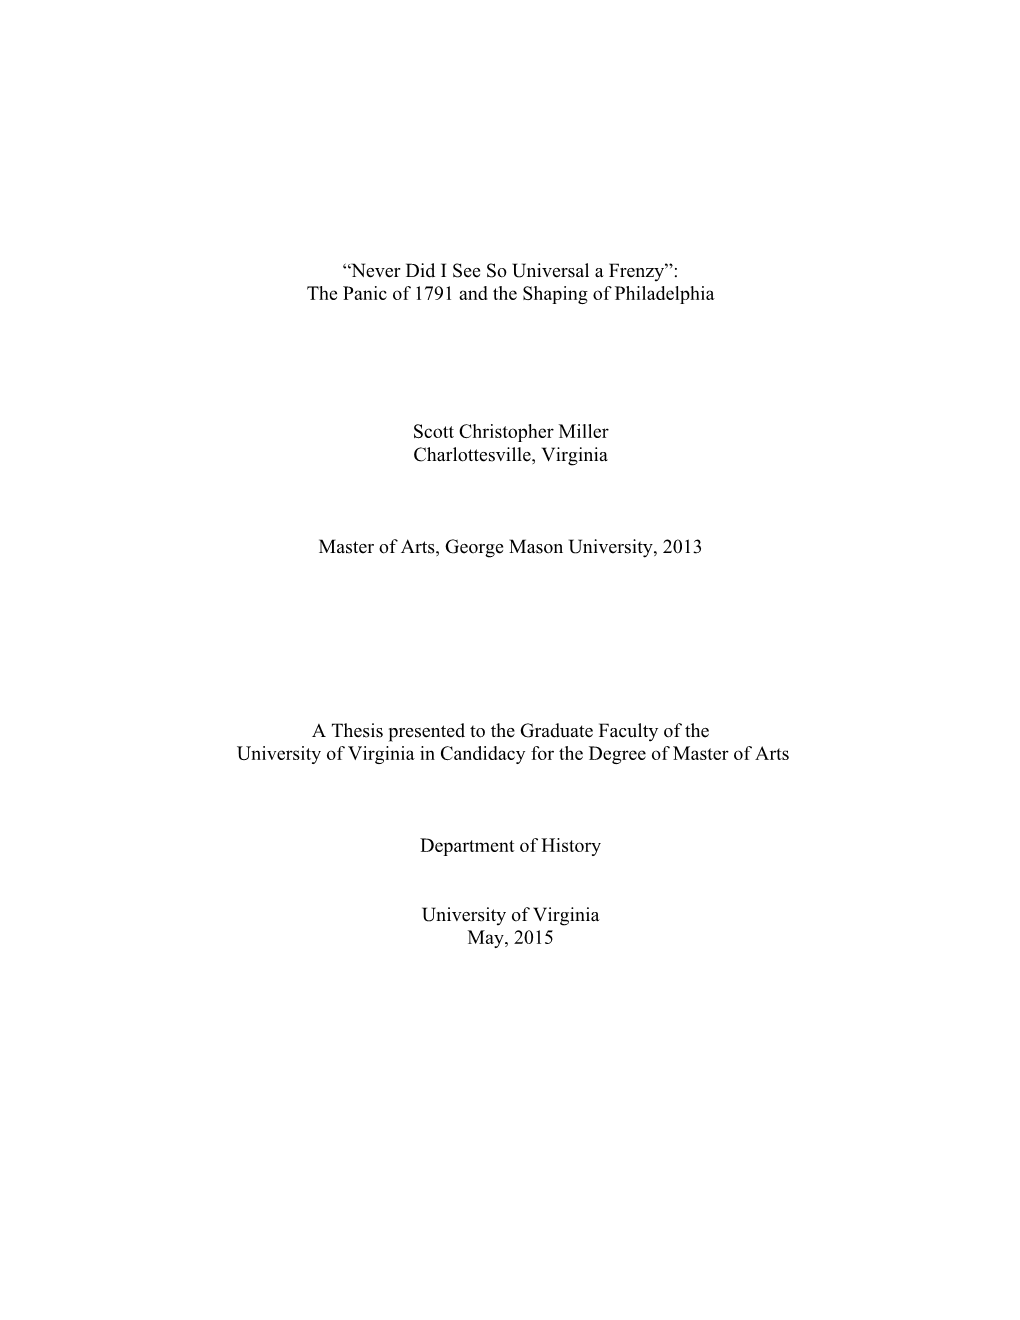 Miller Scott MA Thesis__Submission